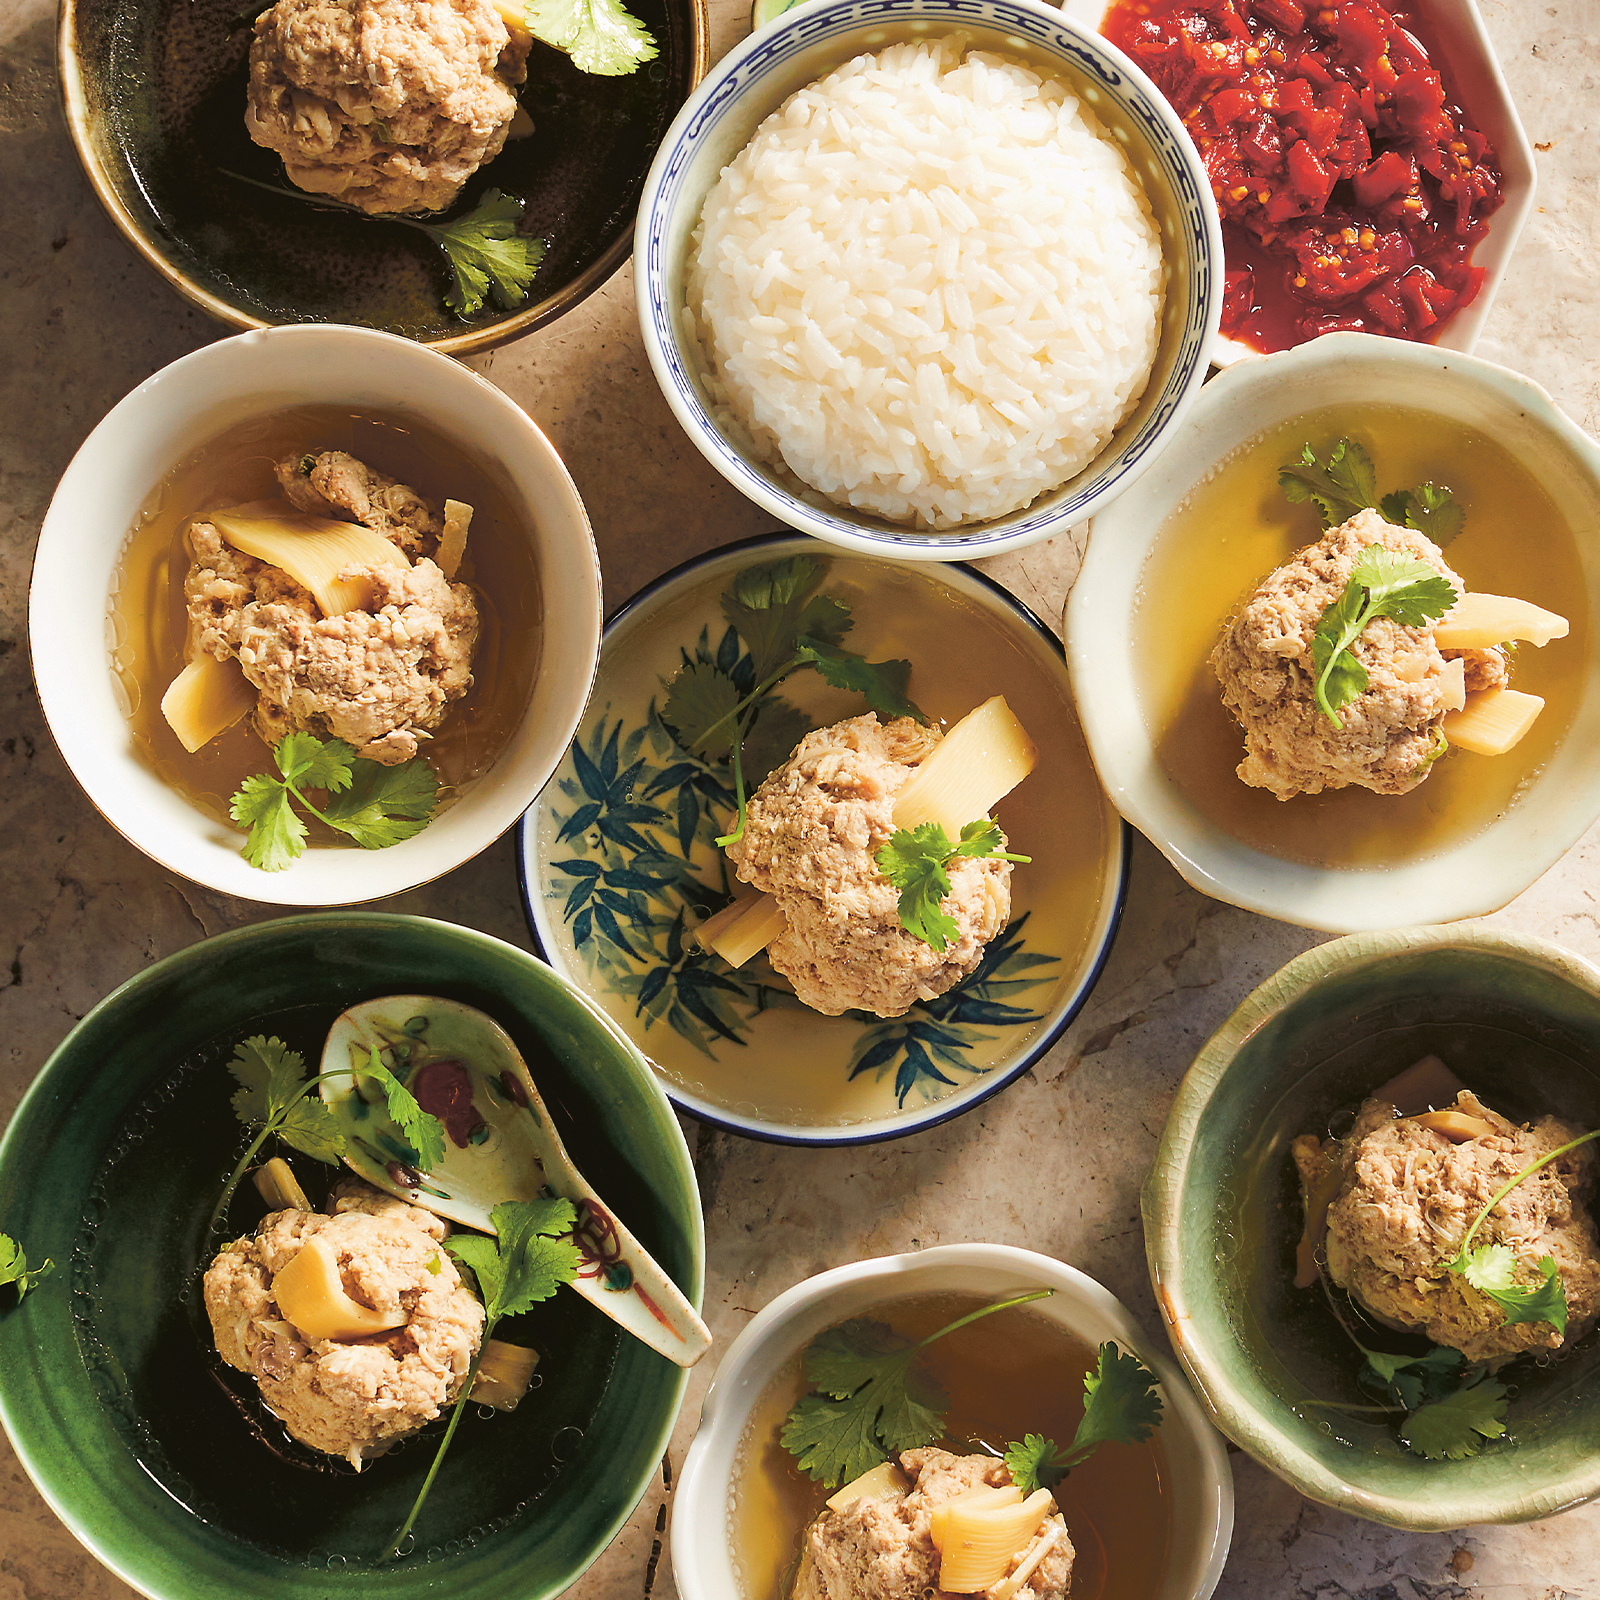 Lots of small bowls of gluten-free Nyonya Soup with pork and crab meatballs are arranged ready for serving with a small bowl of steamed rice and chilli.